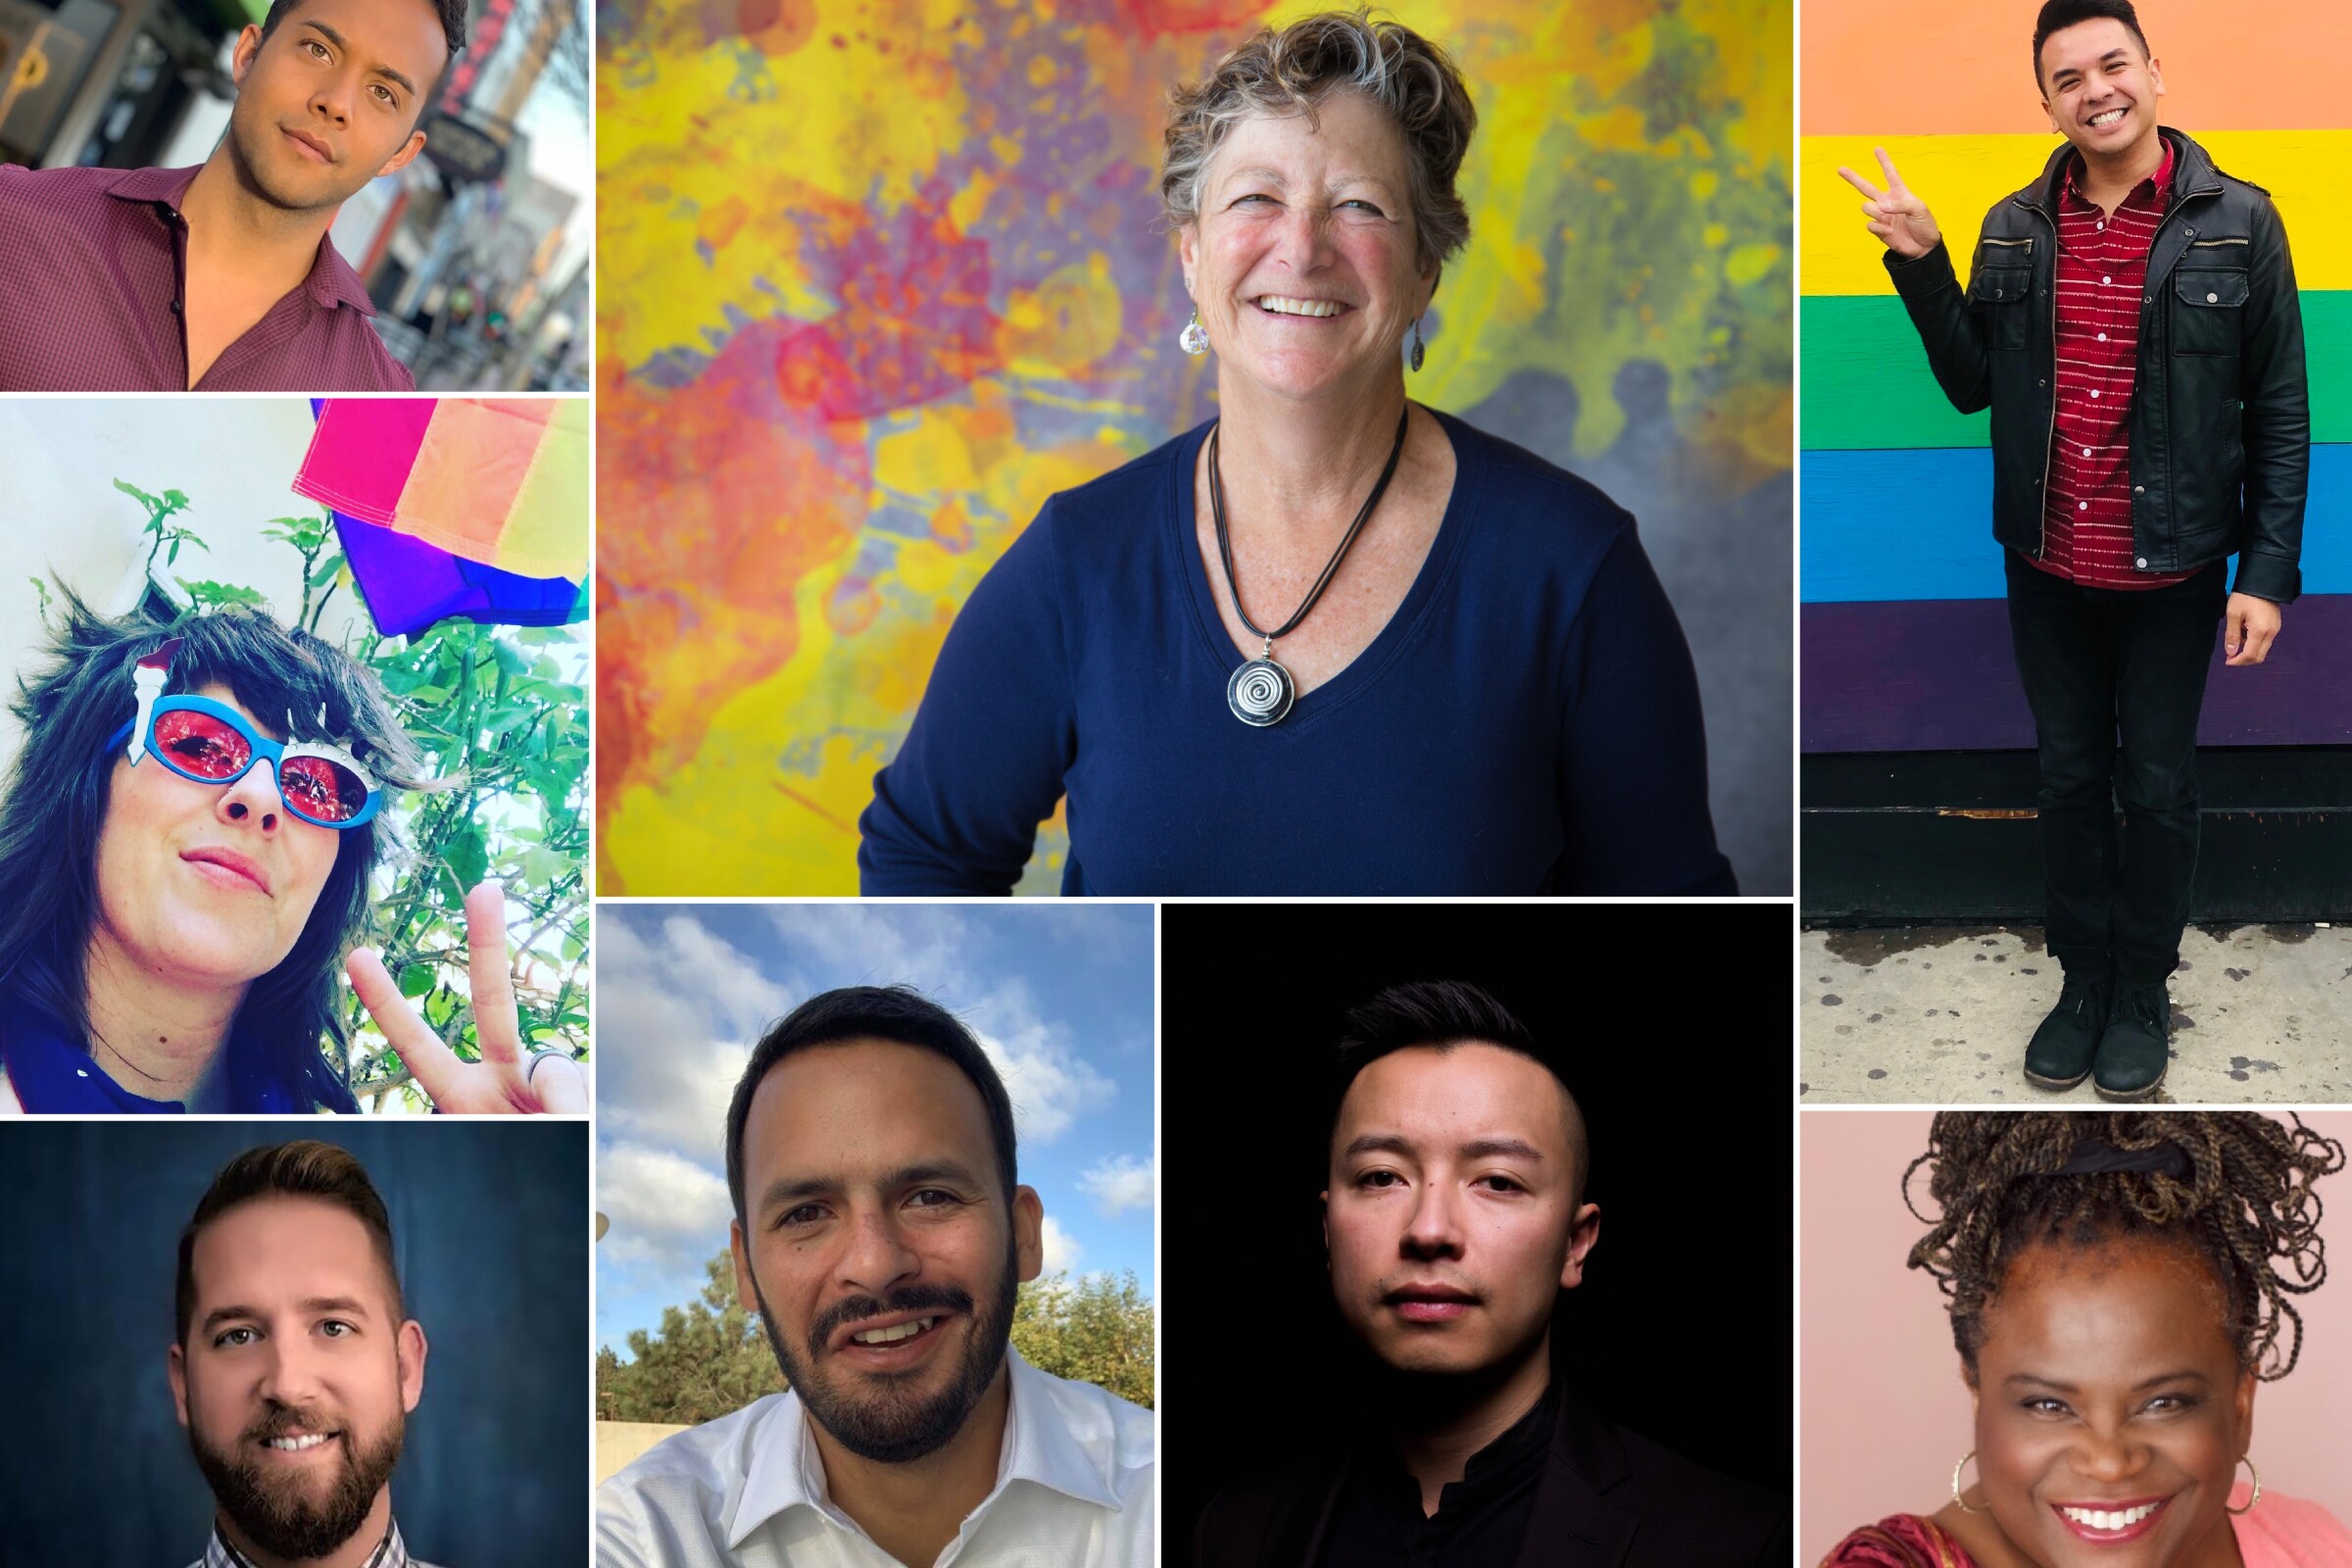 Members of San Diego's LGBTQ community tell us "What Pride means to me ..."